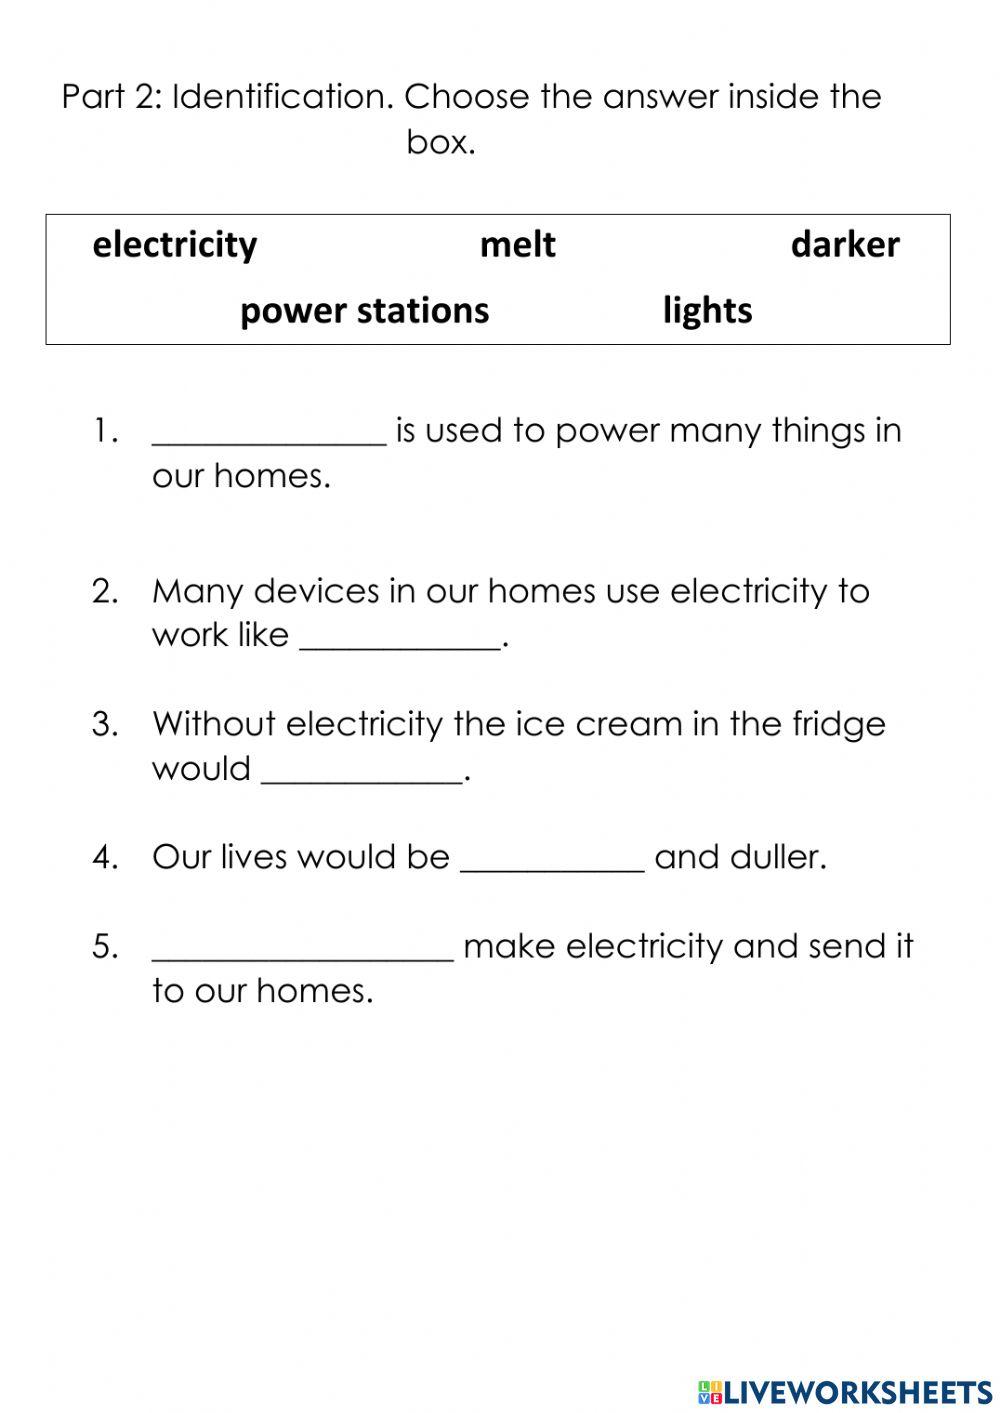 Elctricity in our homes